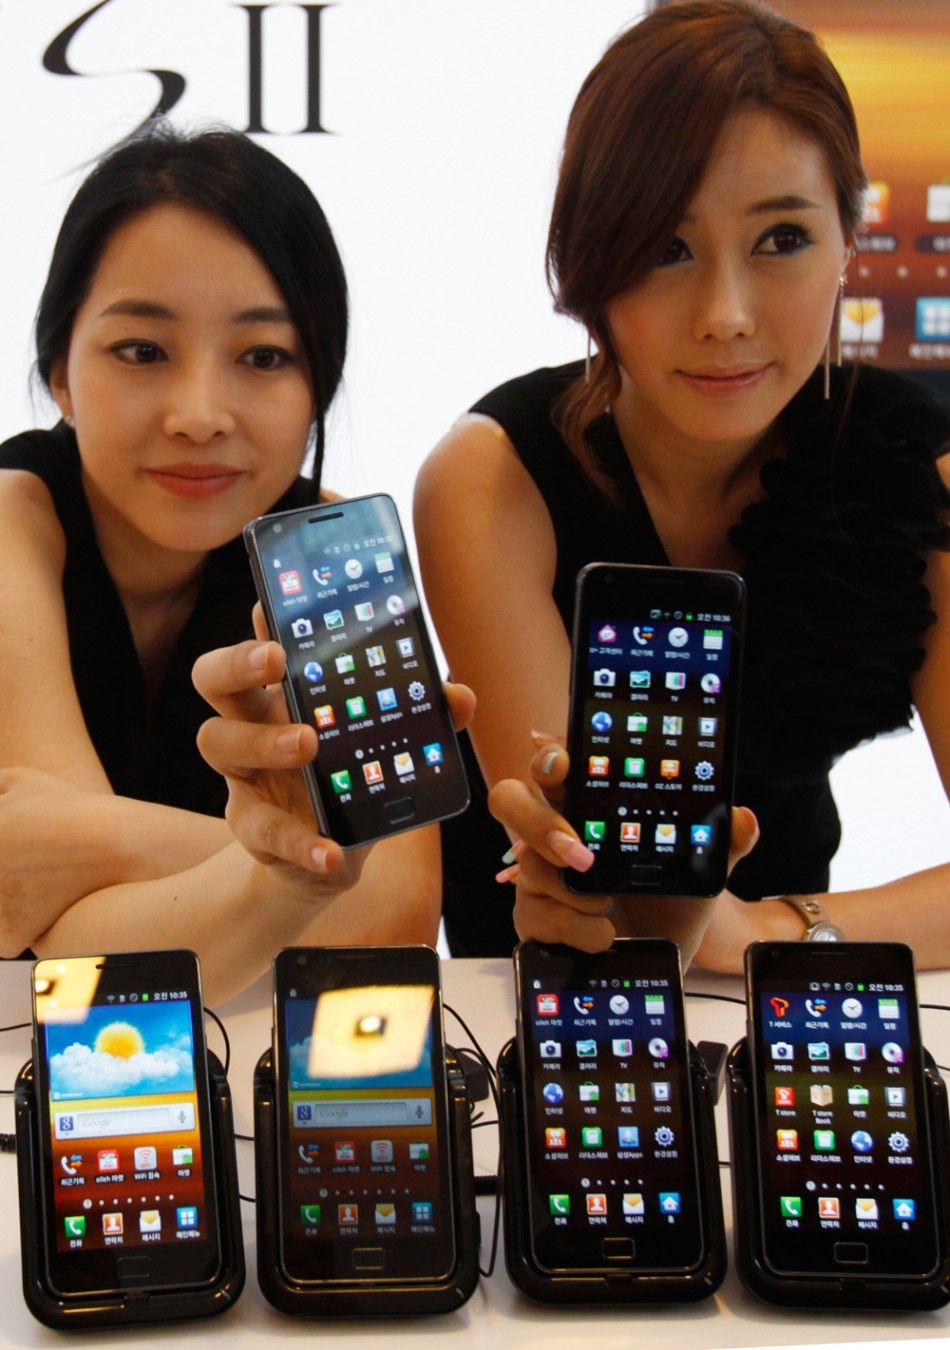 Samsung - If you were Apple, which mobile company would you buy